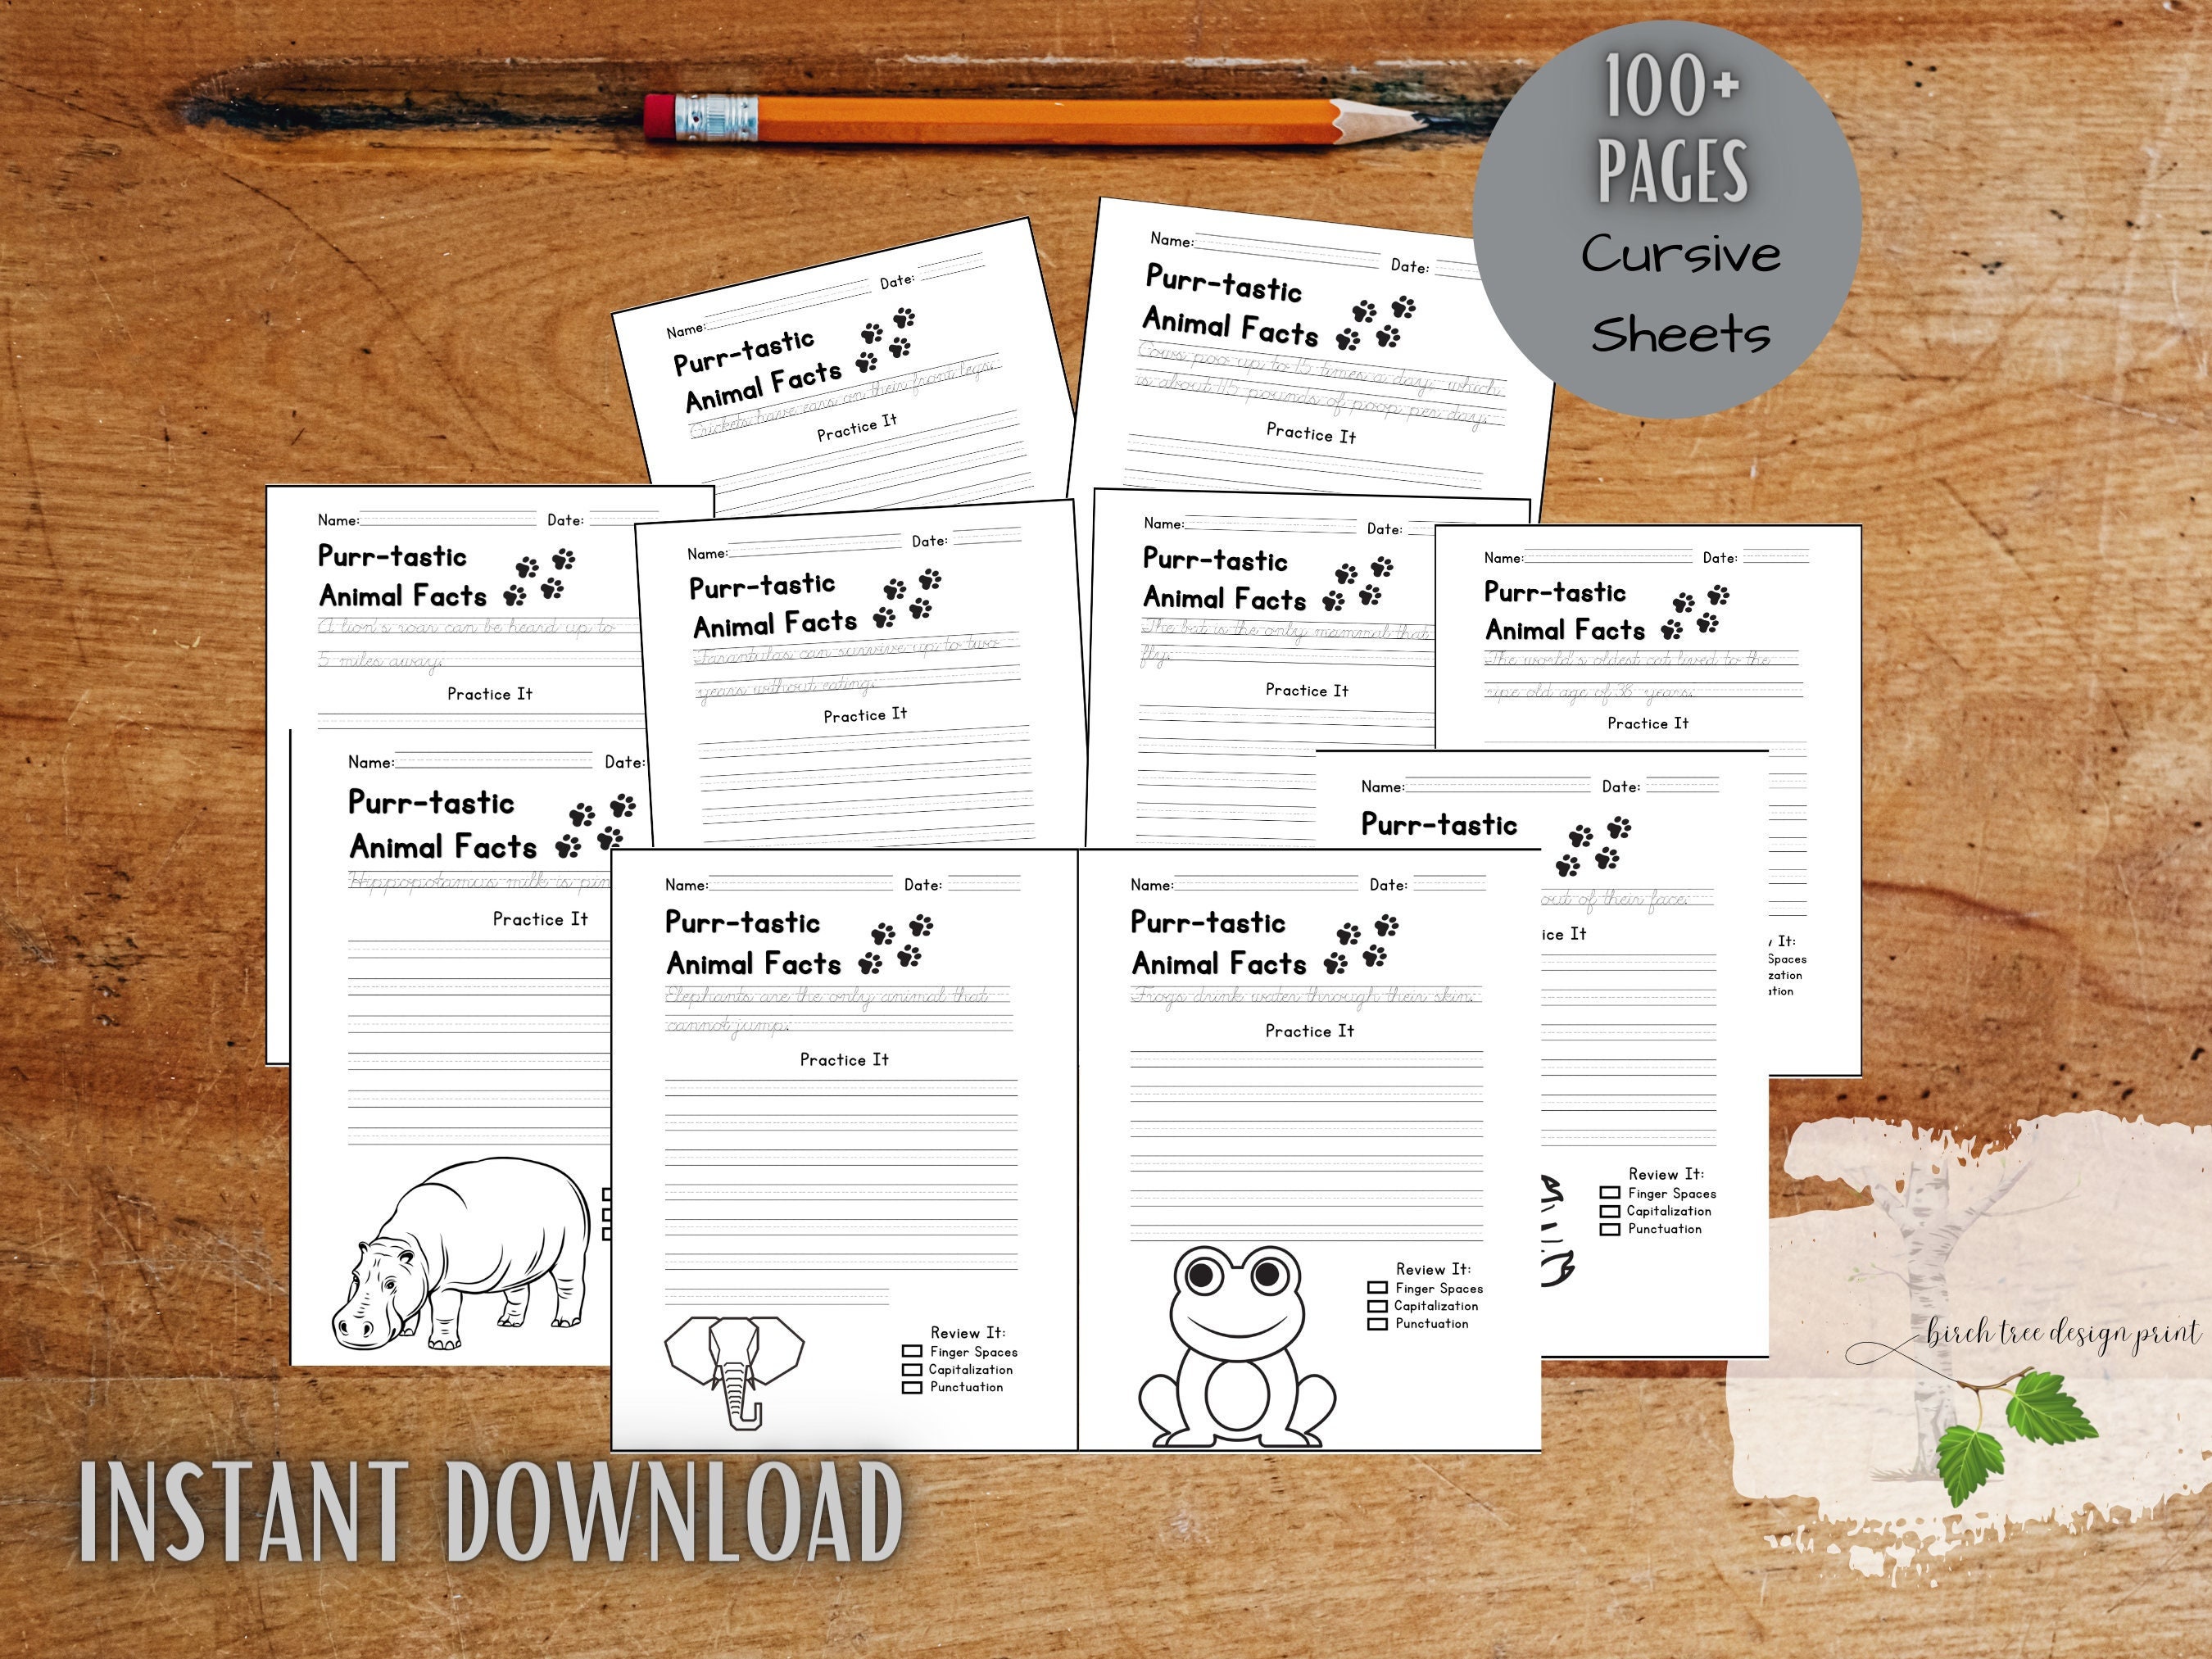 Cursive Handwriting Workbook For Kids: Writing Practice Book For Kids, 100+  Pages To Learn Cursive Handwriting, Practice Penmanship With Positive 